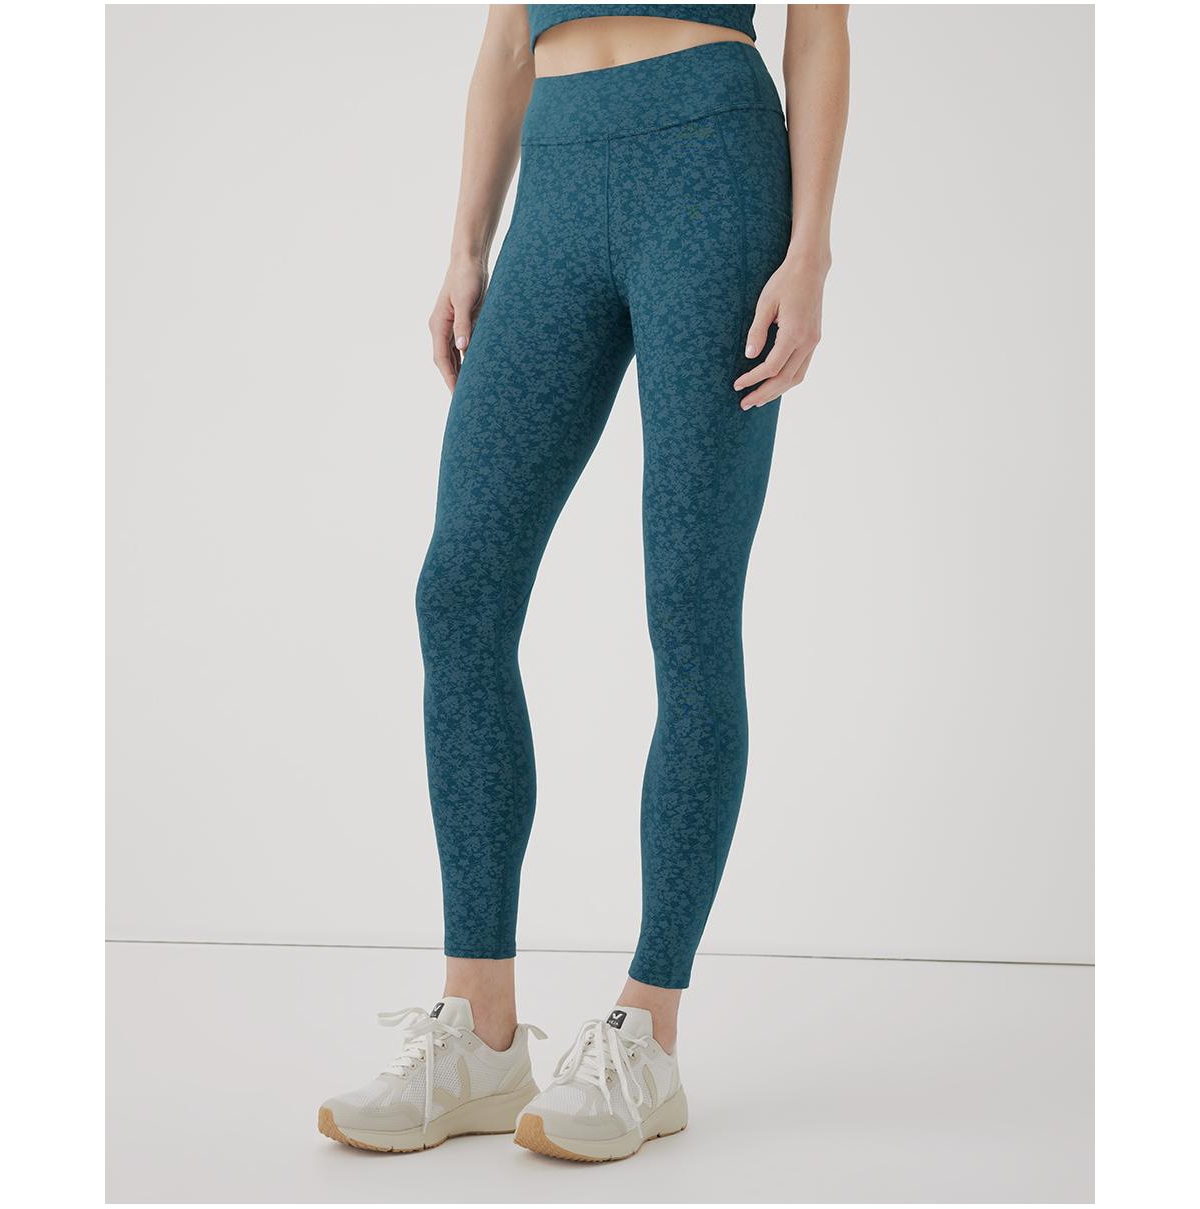 Pact Purefit Pocket Legging Made With Organic Cotton In Winter Wildflower  Celestial